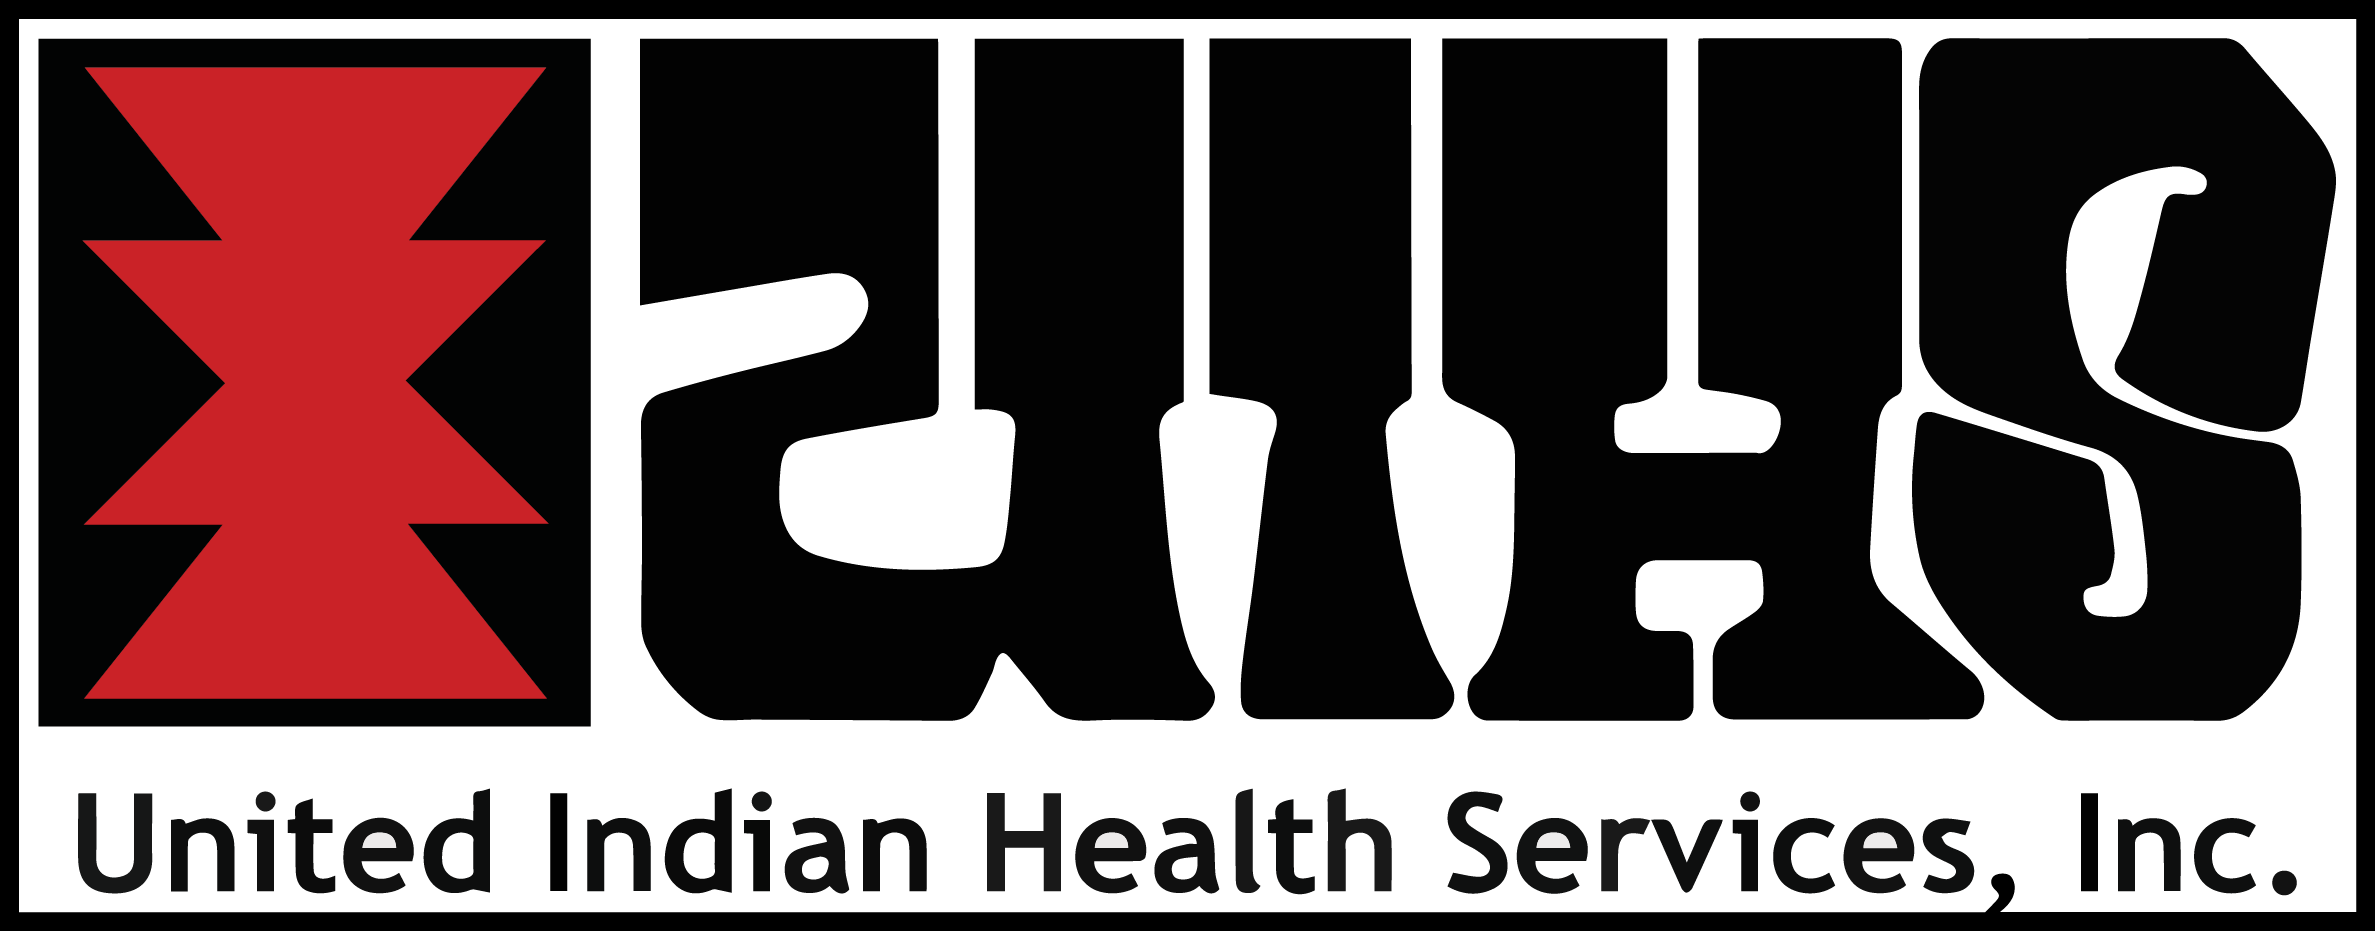 United Indian Health Services